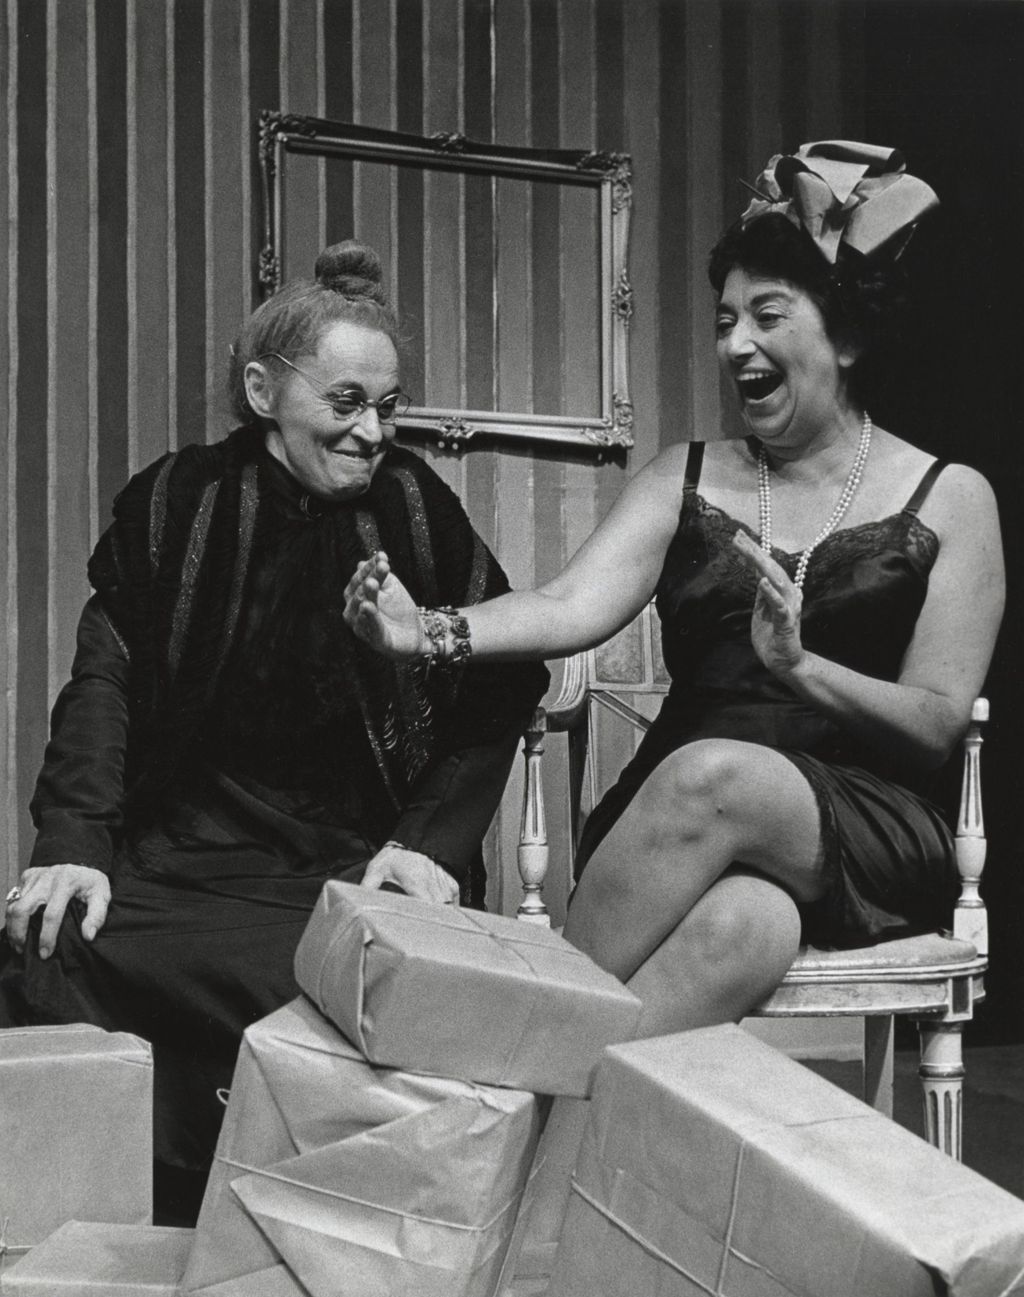 Beatrice Fredman and Tedra Klein on stage in production of "The American Dream" at Hull-House Theater